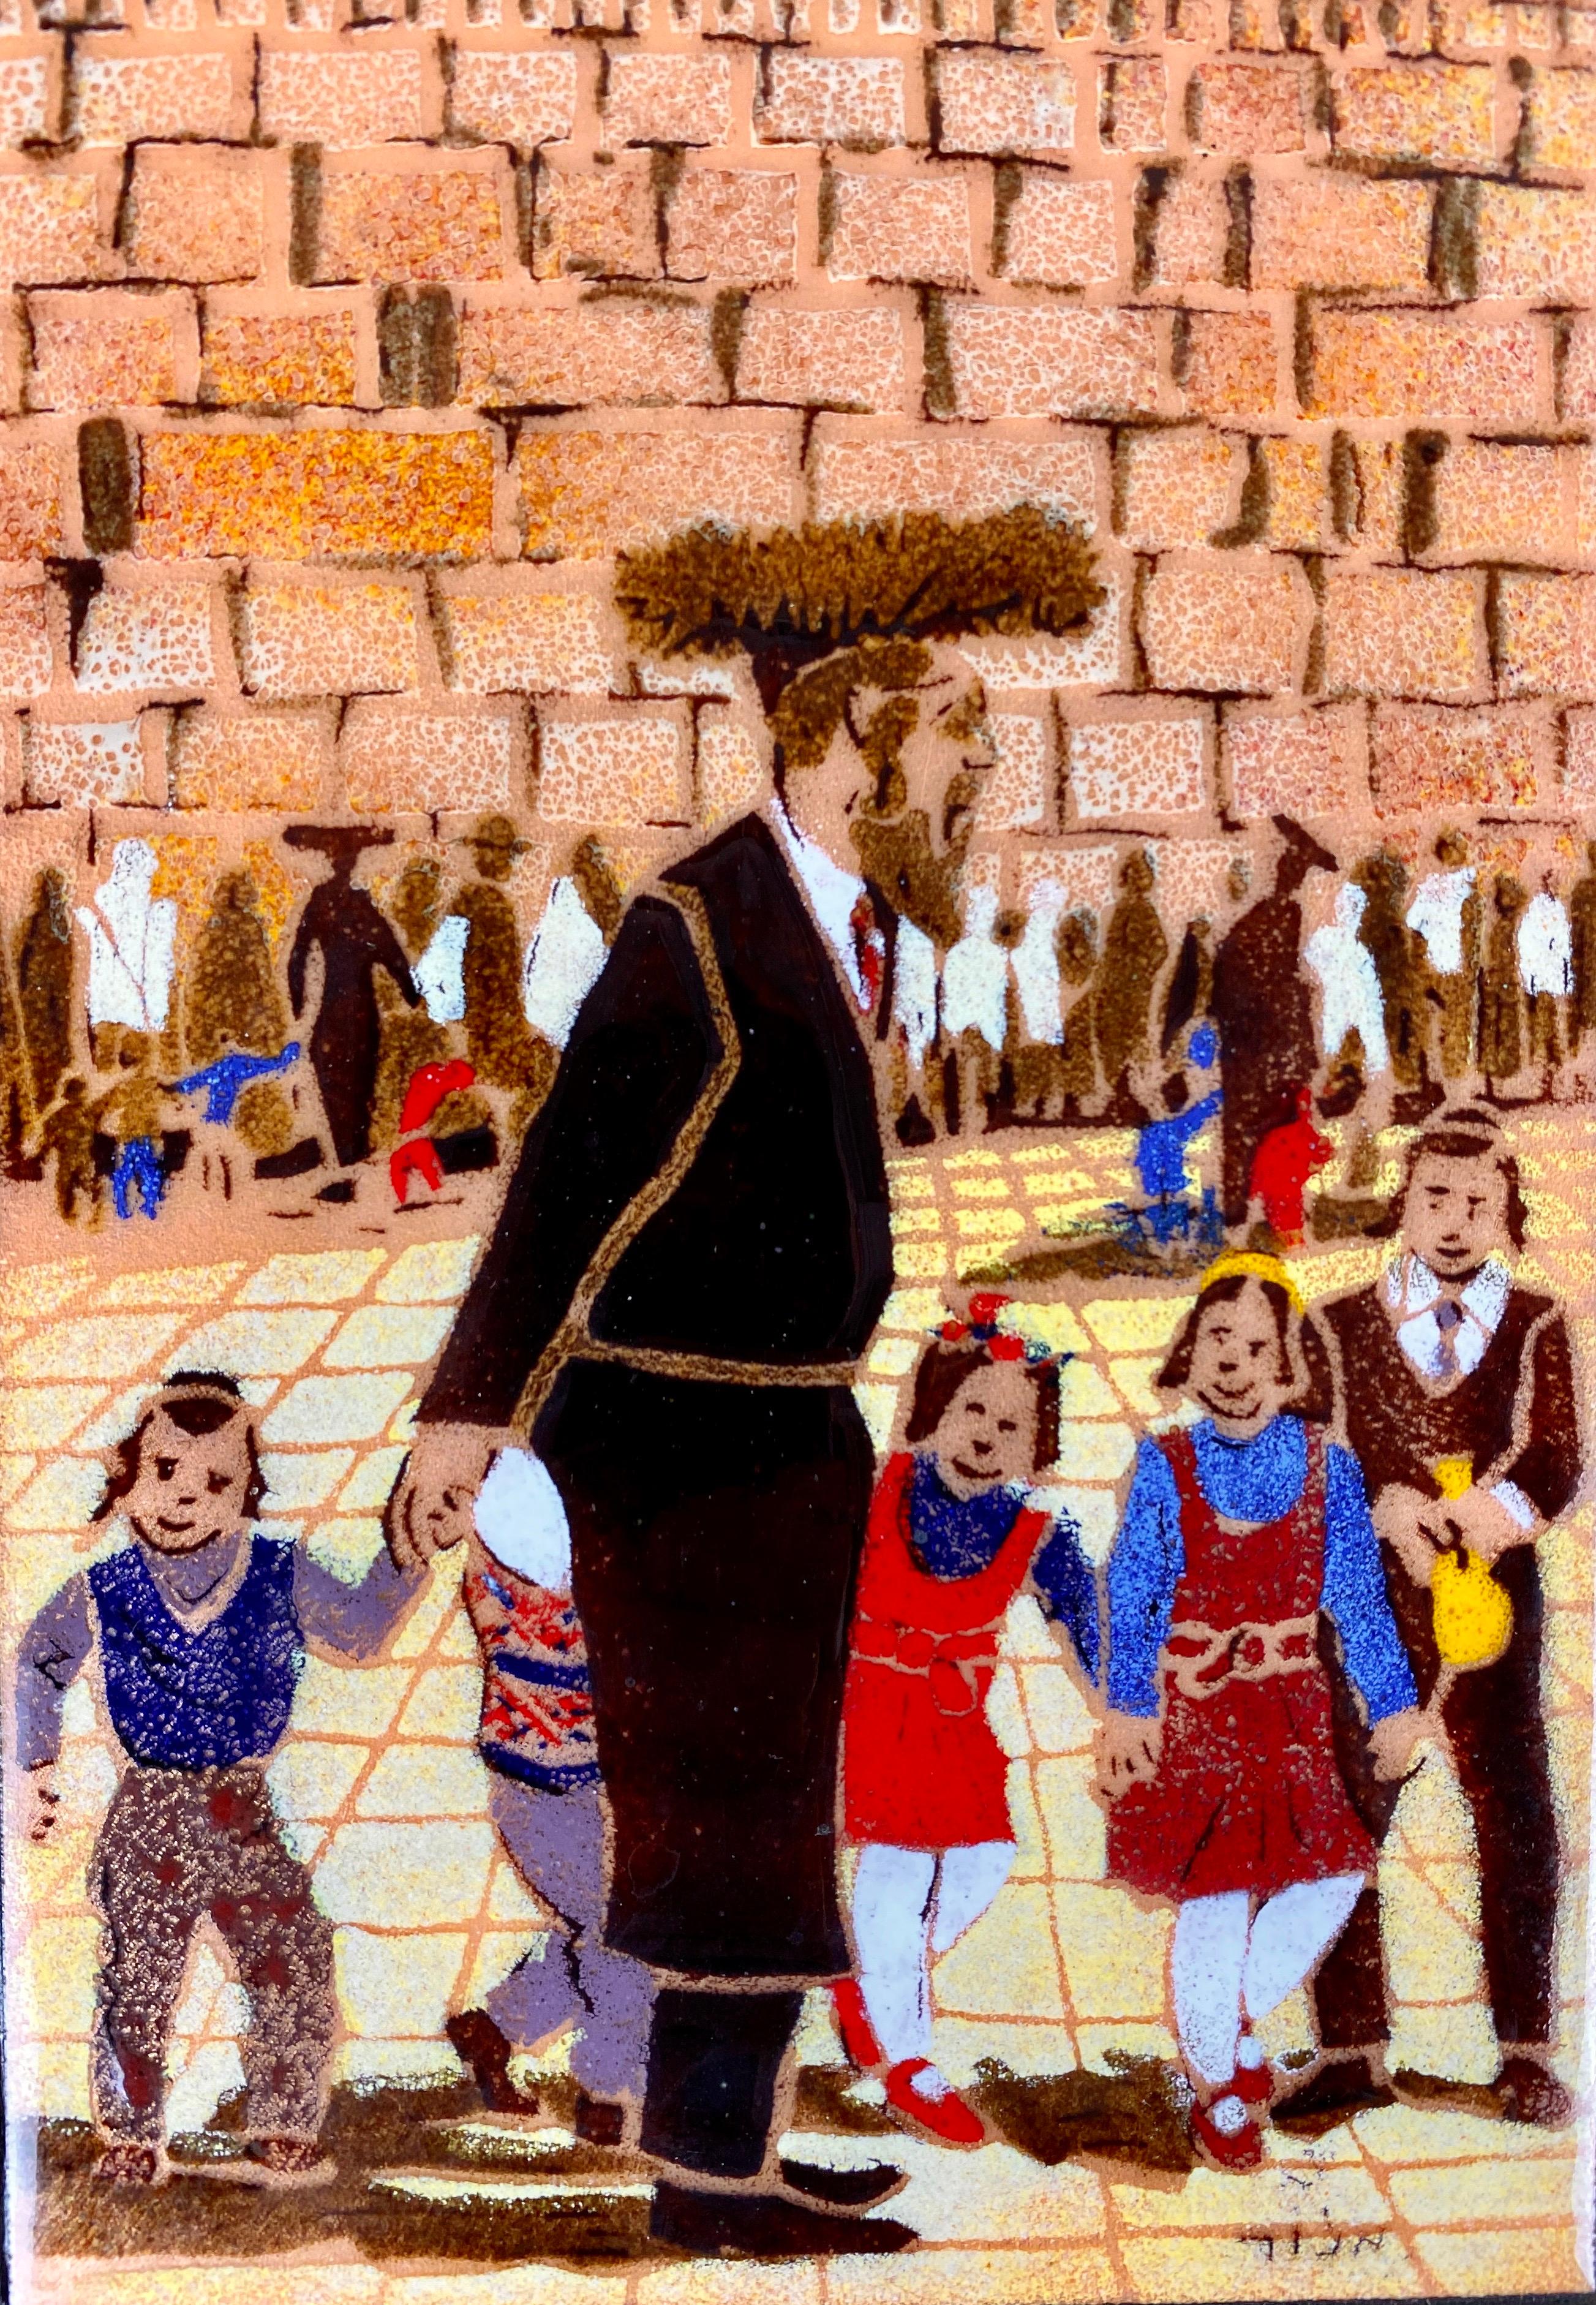 Out of the ordinary mid century enamel painting from a jewish artist. This unusual painting depicts a man with five children passing by the famous wailing wall in Jerusalem. A very expressive and also extraordinary work artfully painted by the